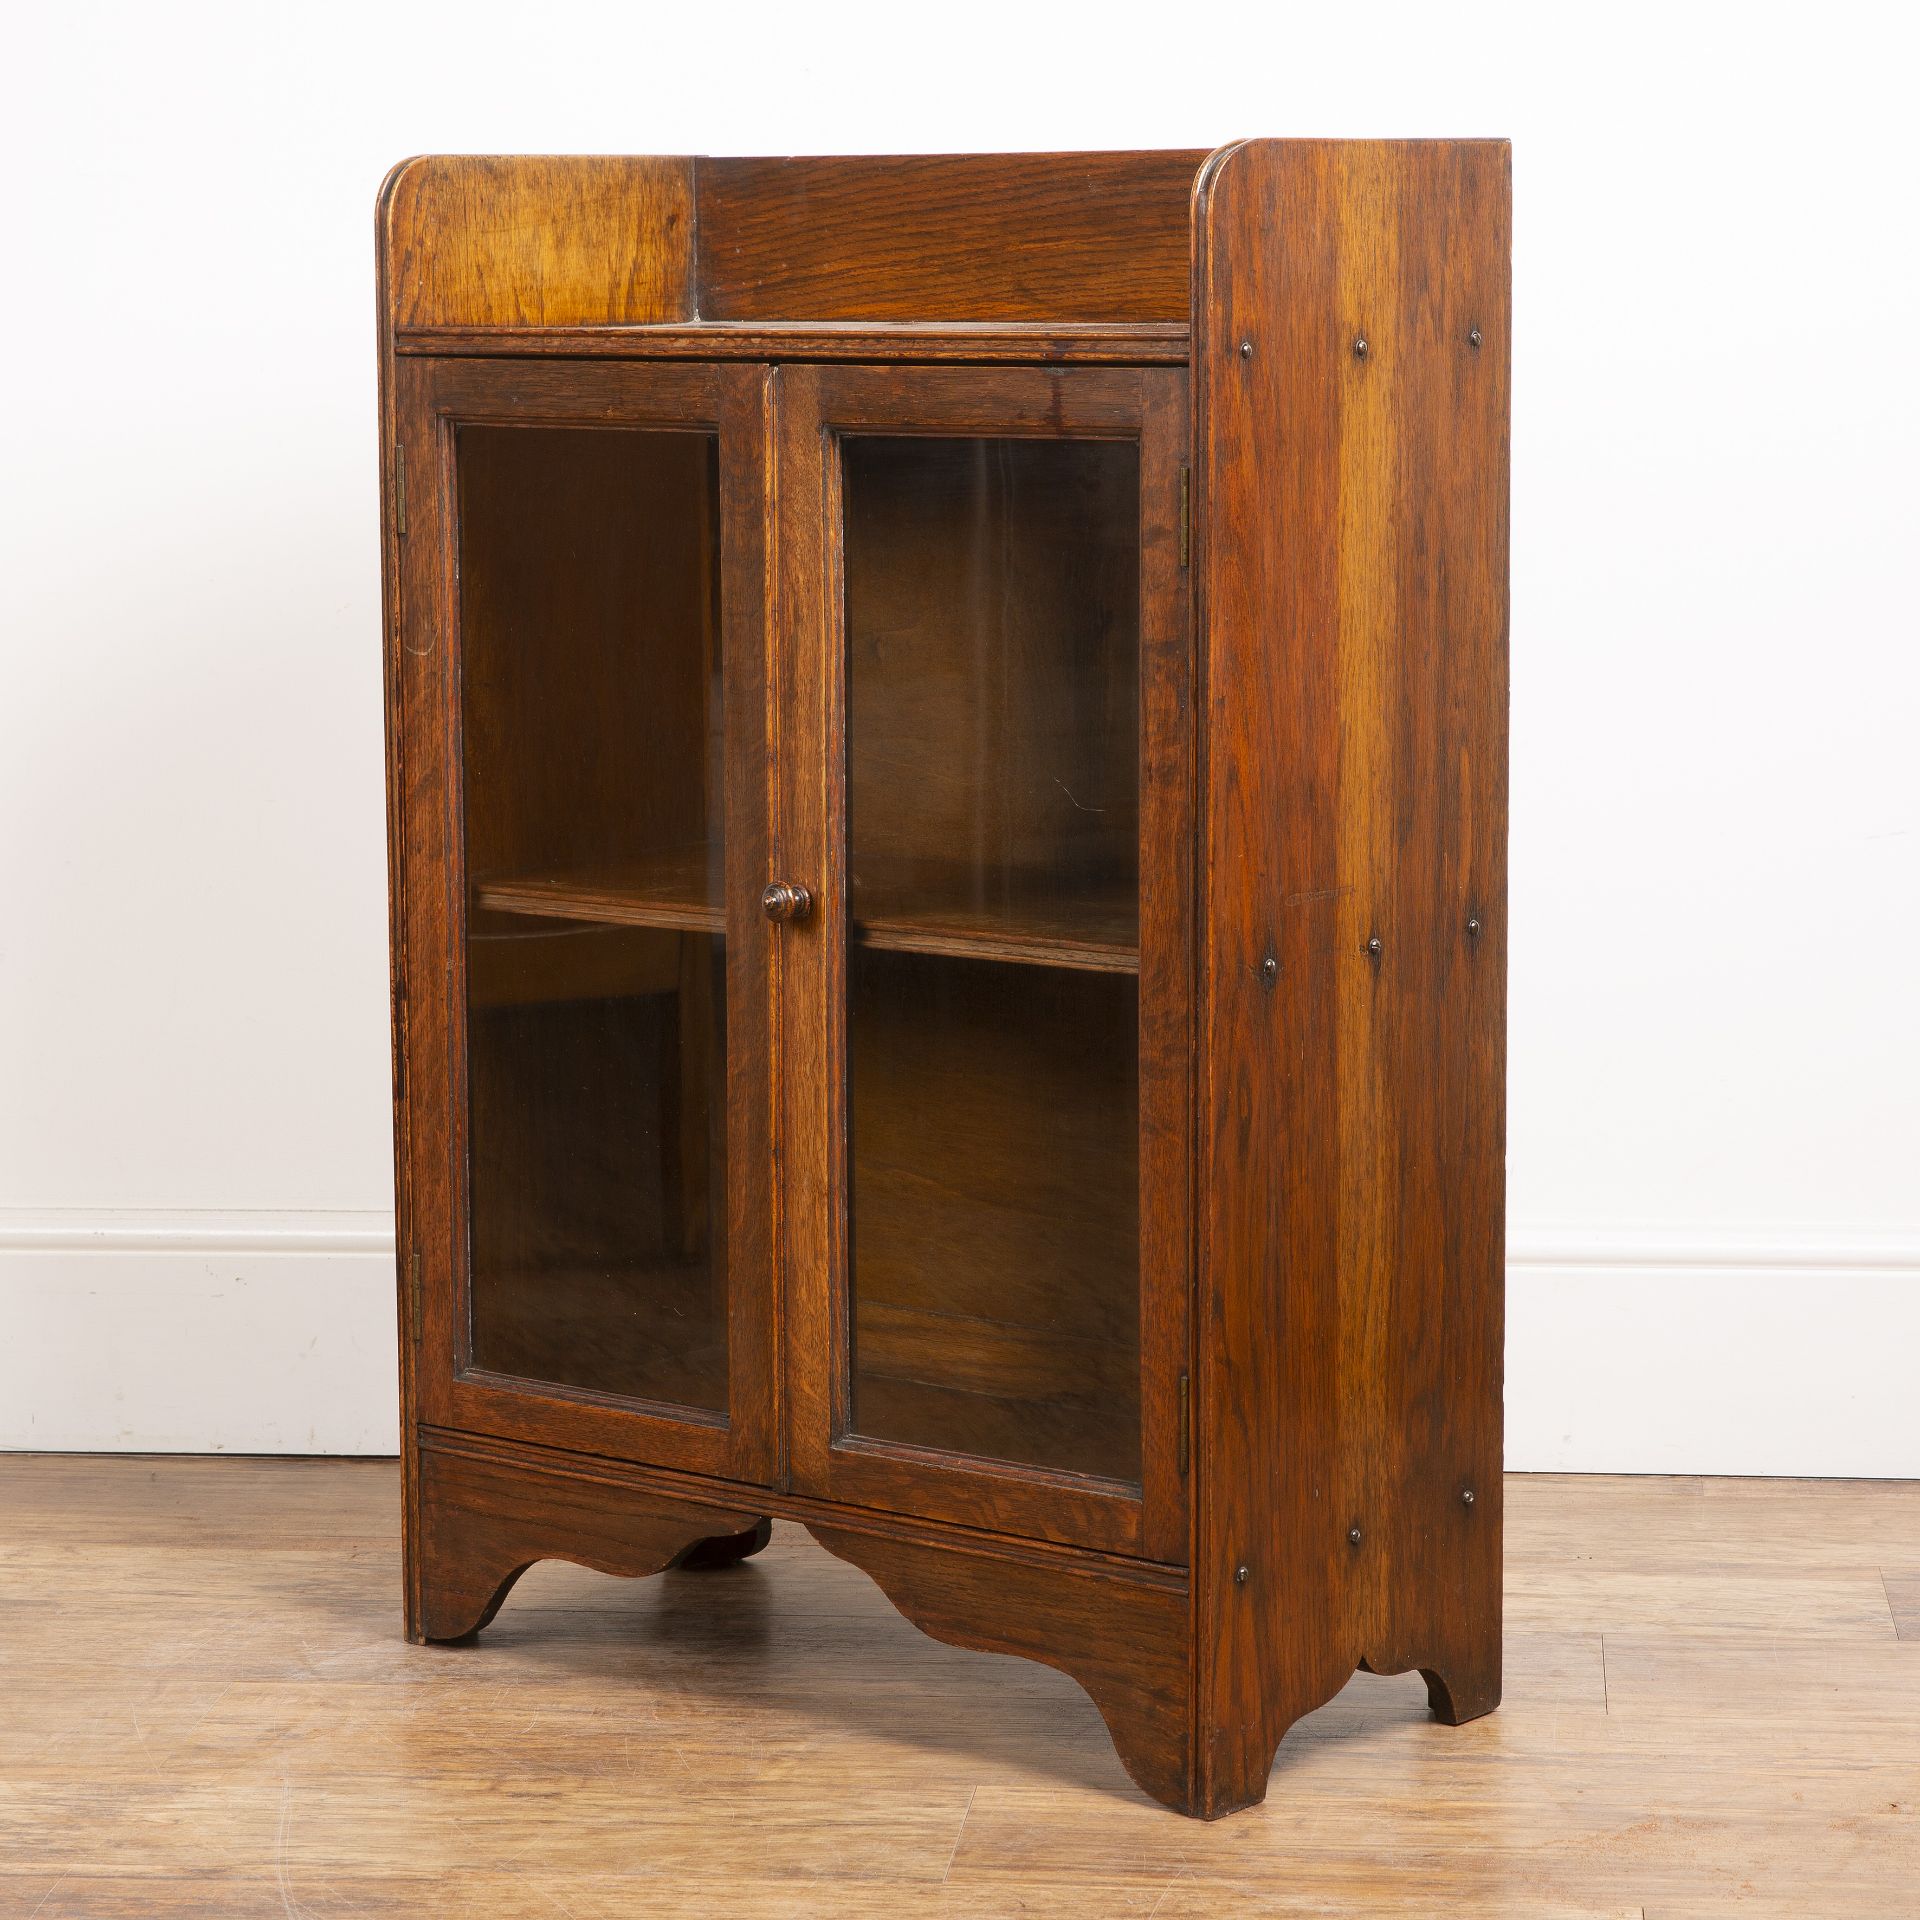 Attributed to Heals oak cupboard, with galleried top, two glazed panel doors with a turned wooden - Image 4 of 5